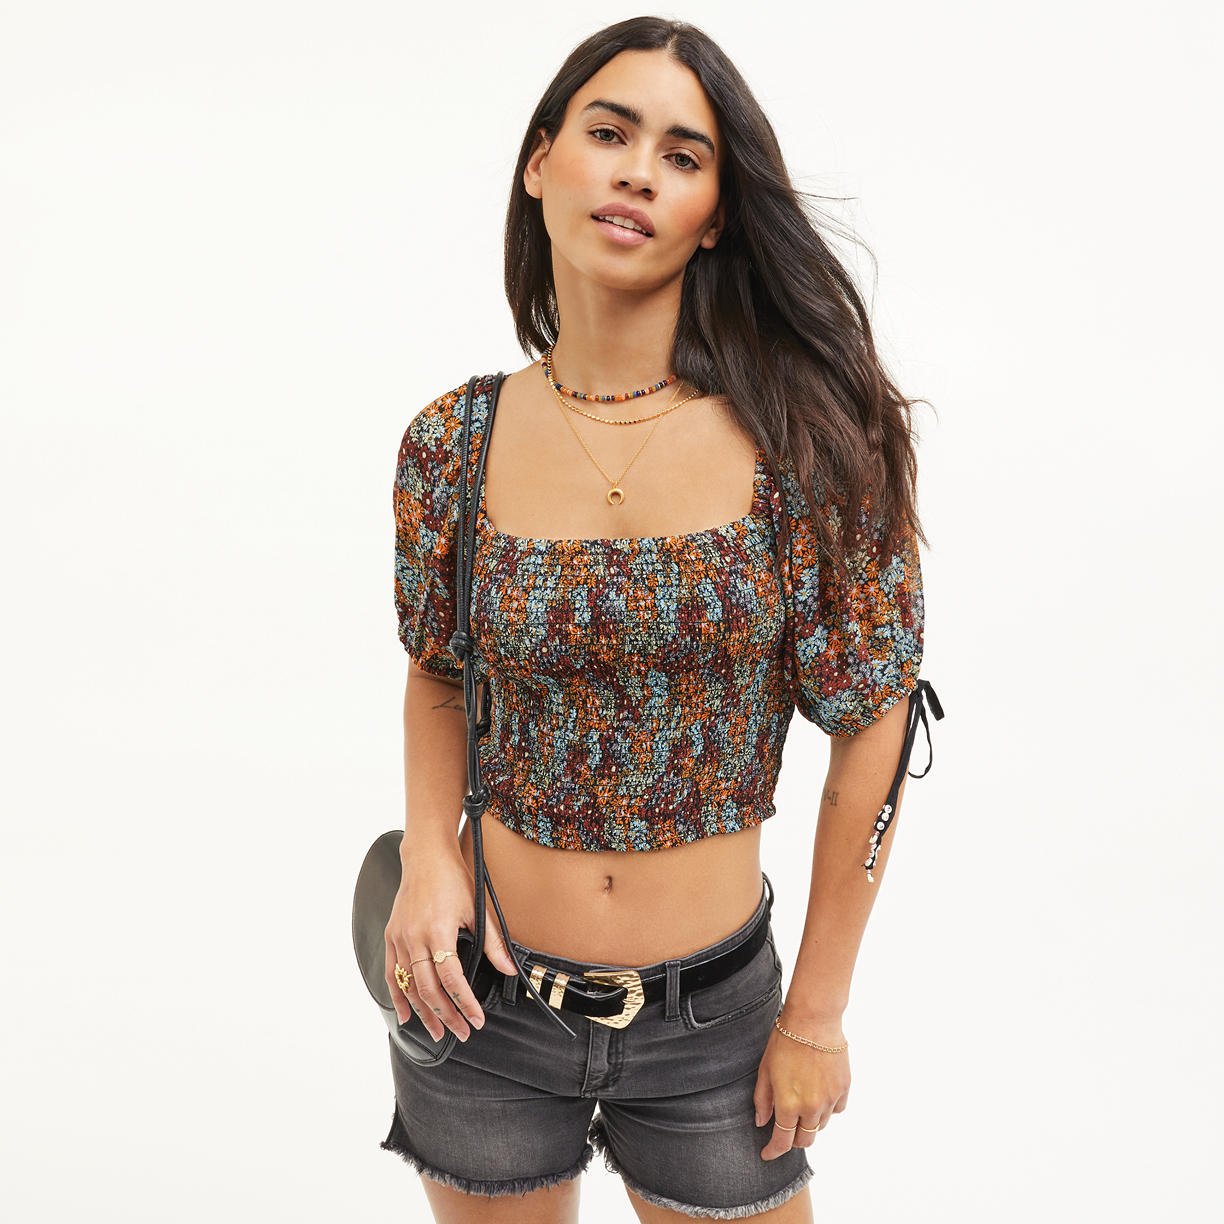 Free People Up to 65% Off